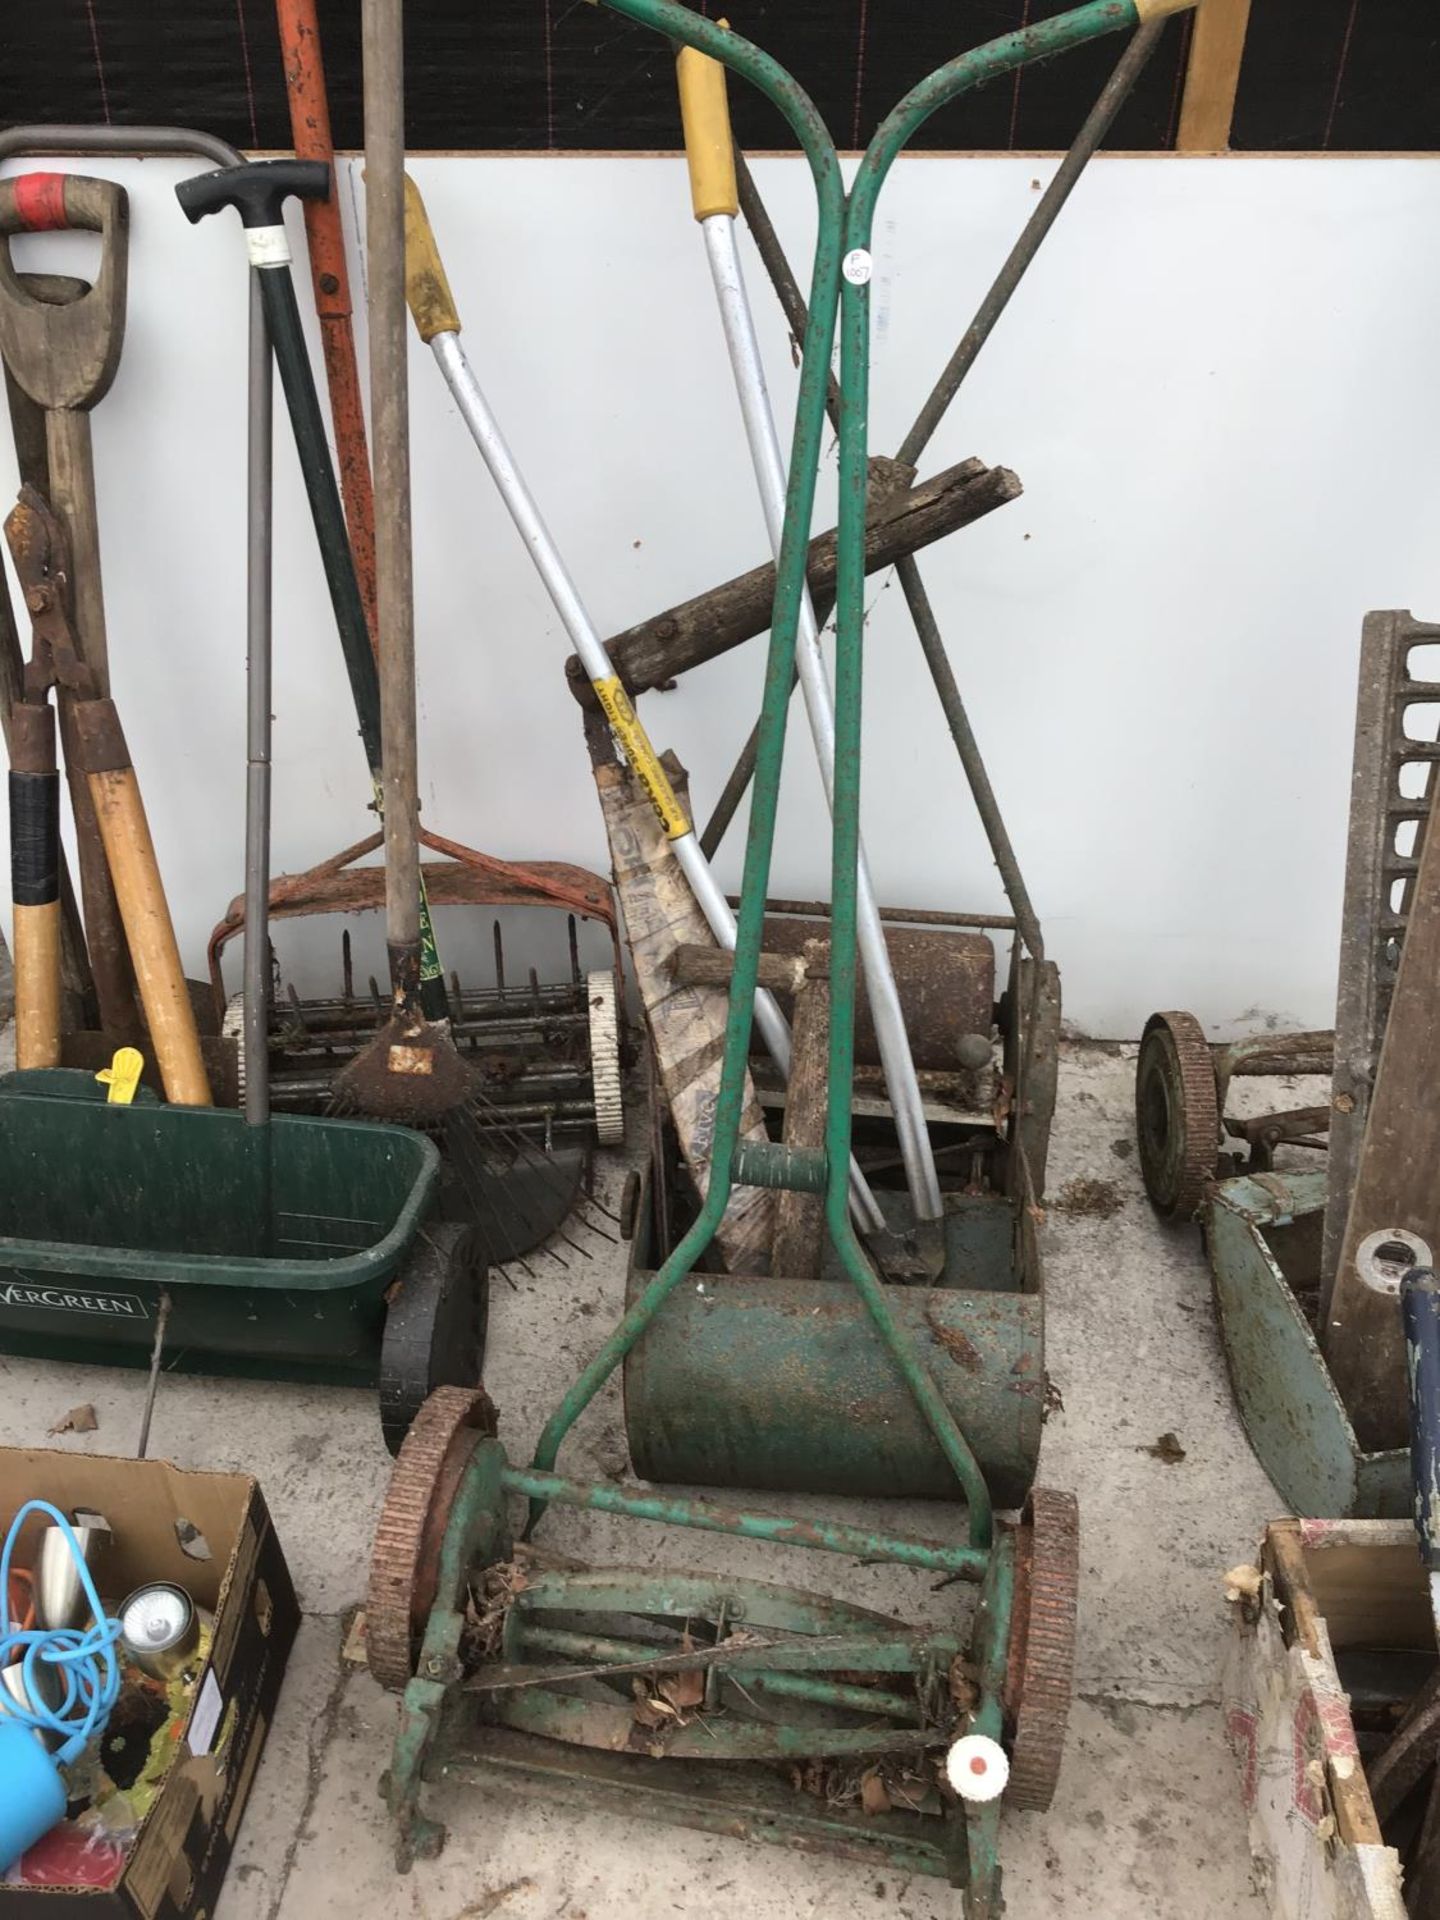 A LARGE COLLECTION OF VINTAGE GARDENING TOOLS TO INCLUDE SHEARS, MOWERS, SPADES ETC - Image 3 of 4